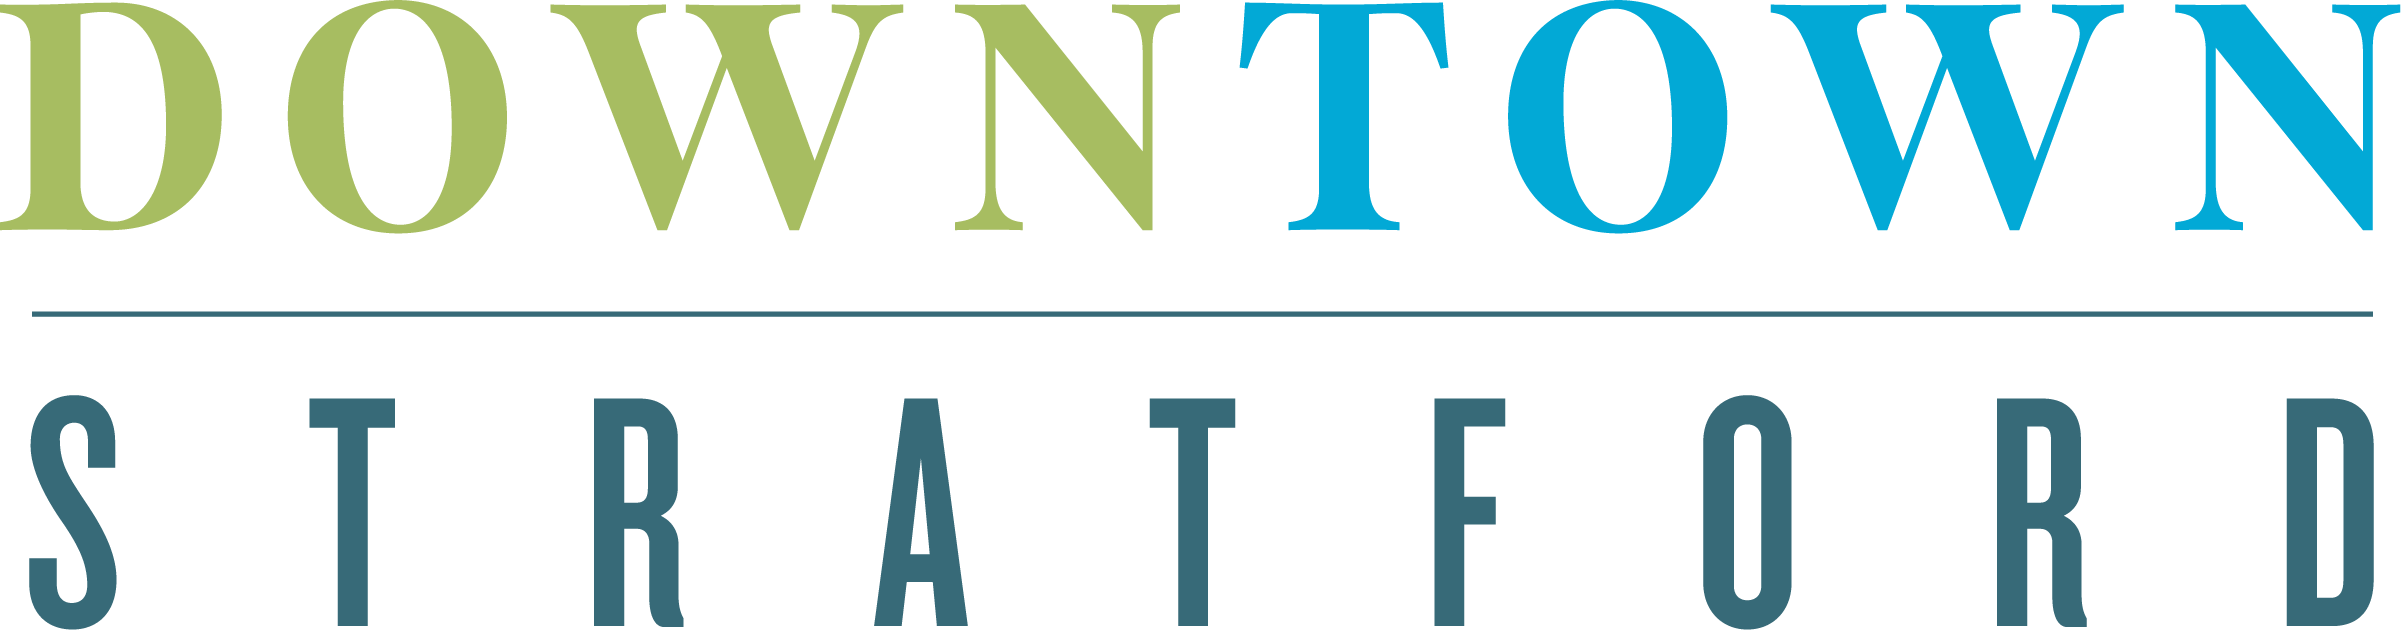 Downtown Stratford logo in blue and green colours.